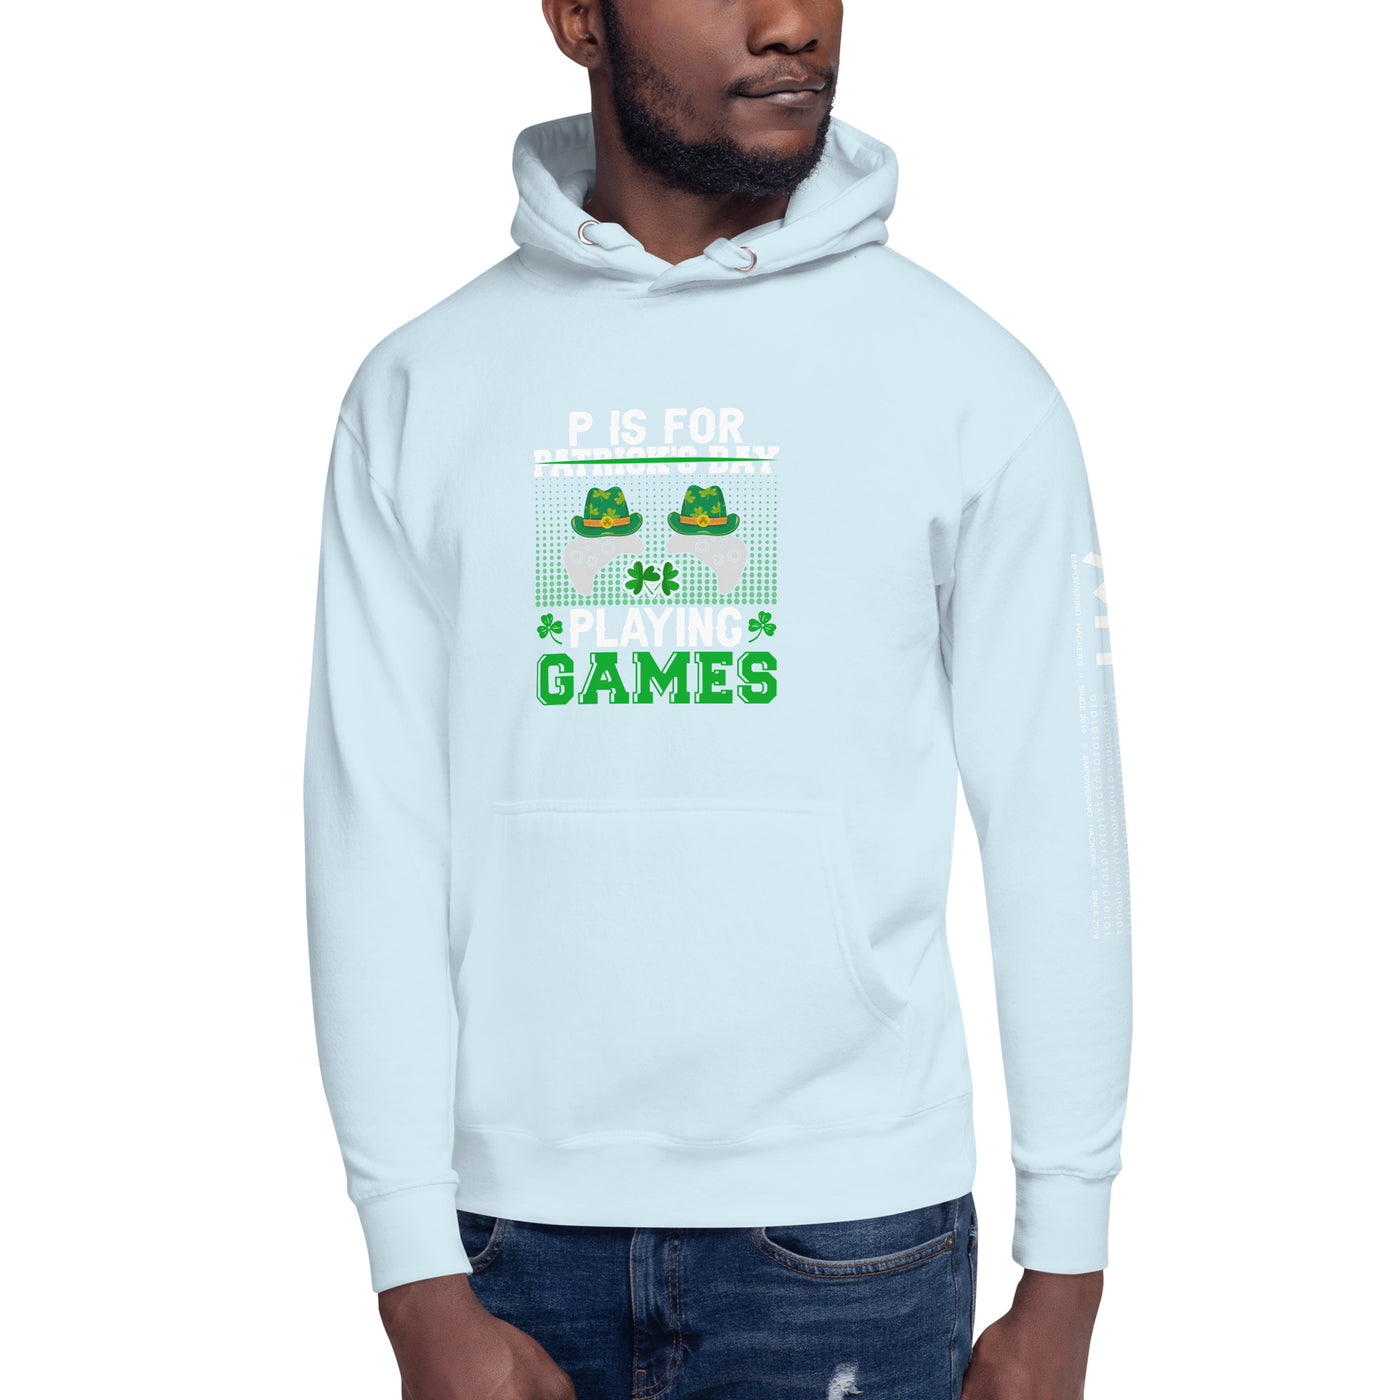 P is for "Playing Games" - Unisex Hoodie